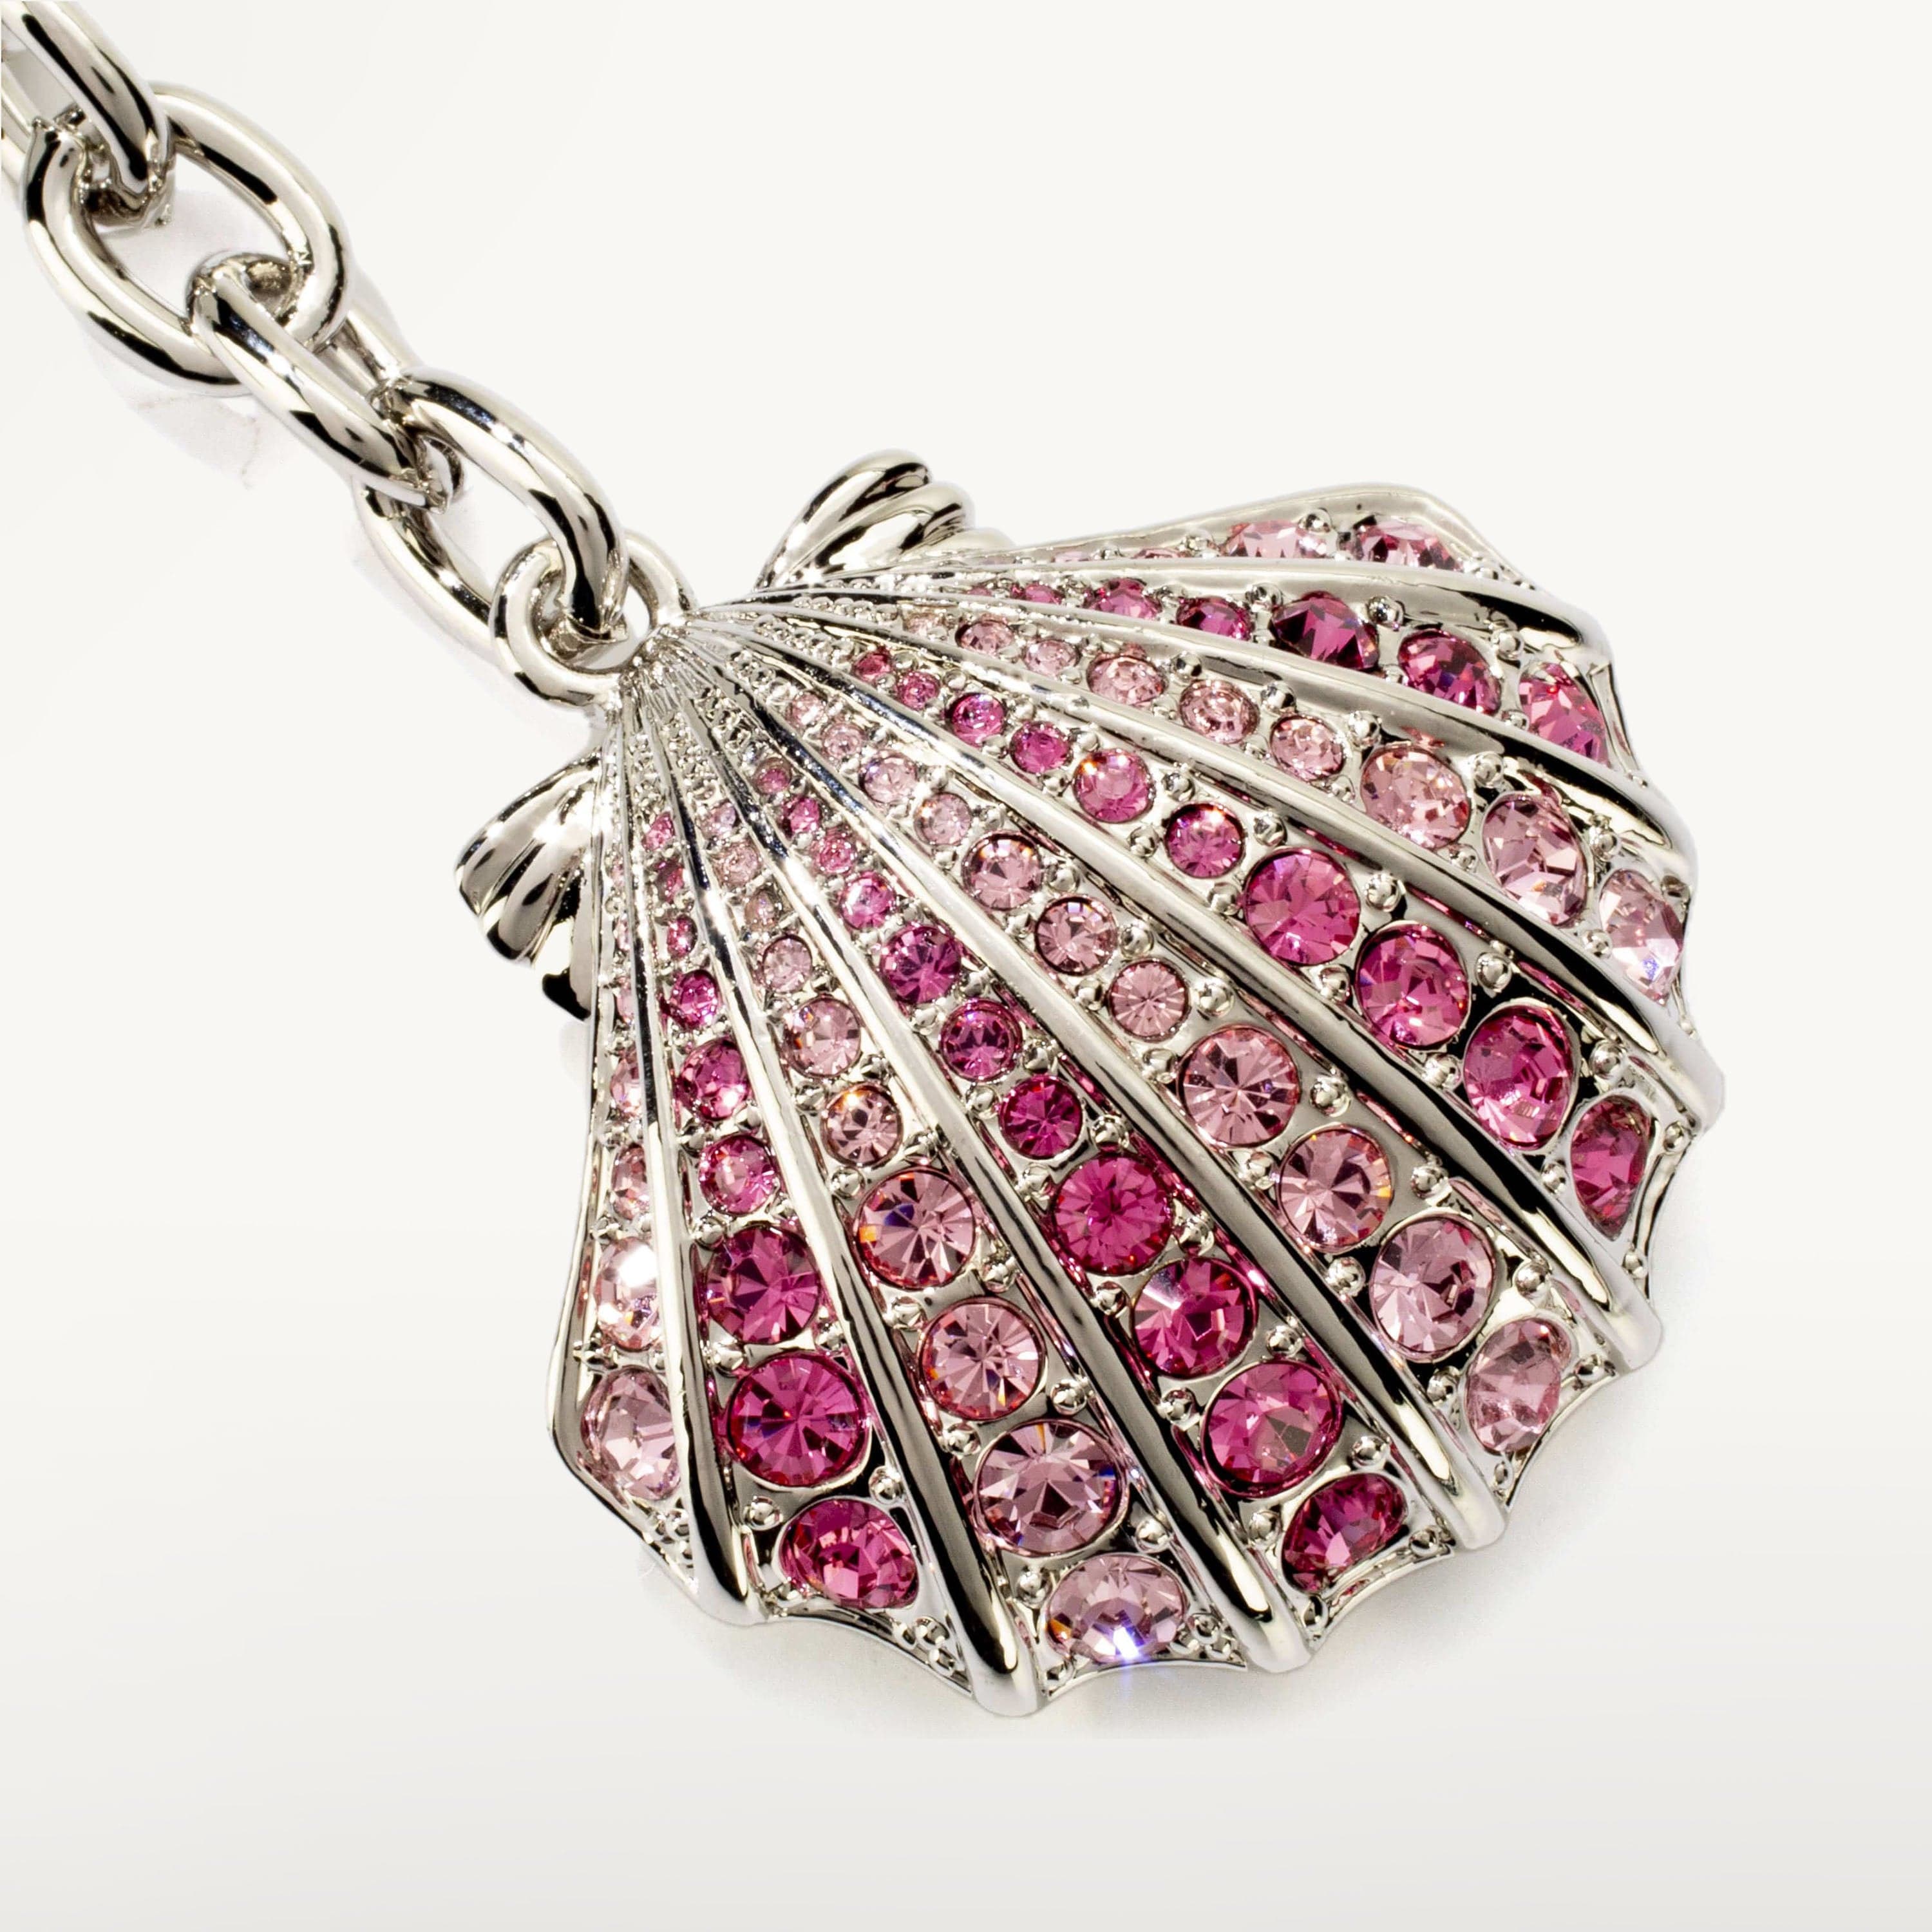 Kalifano Crystal Keychains Rose Clamshell Keychain made with Swarovski Crystals SKC-094